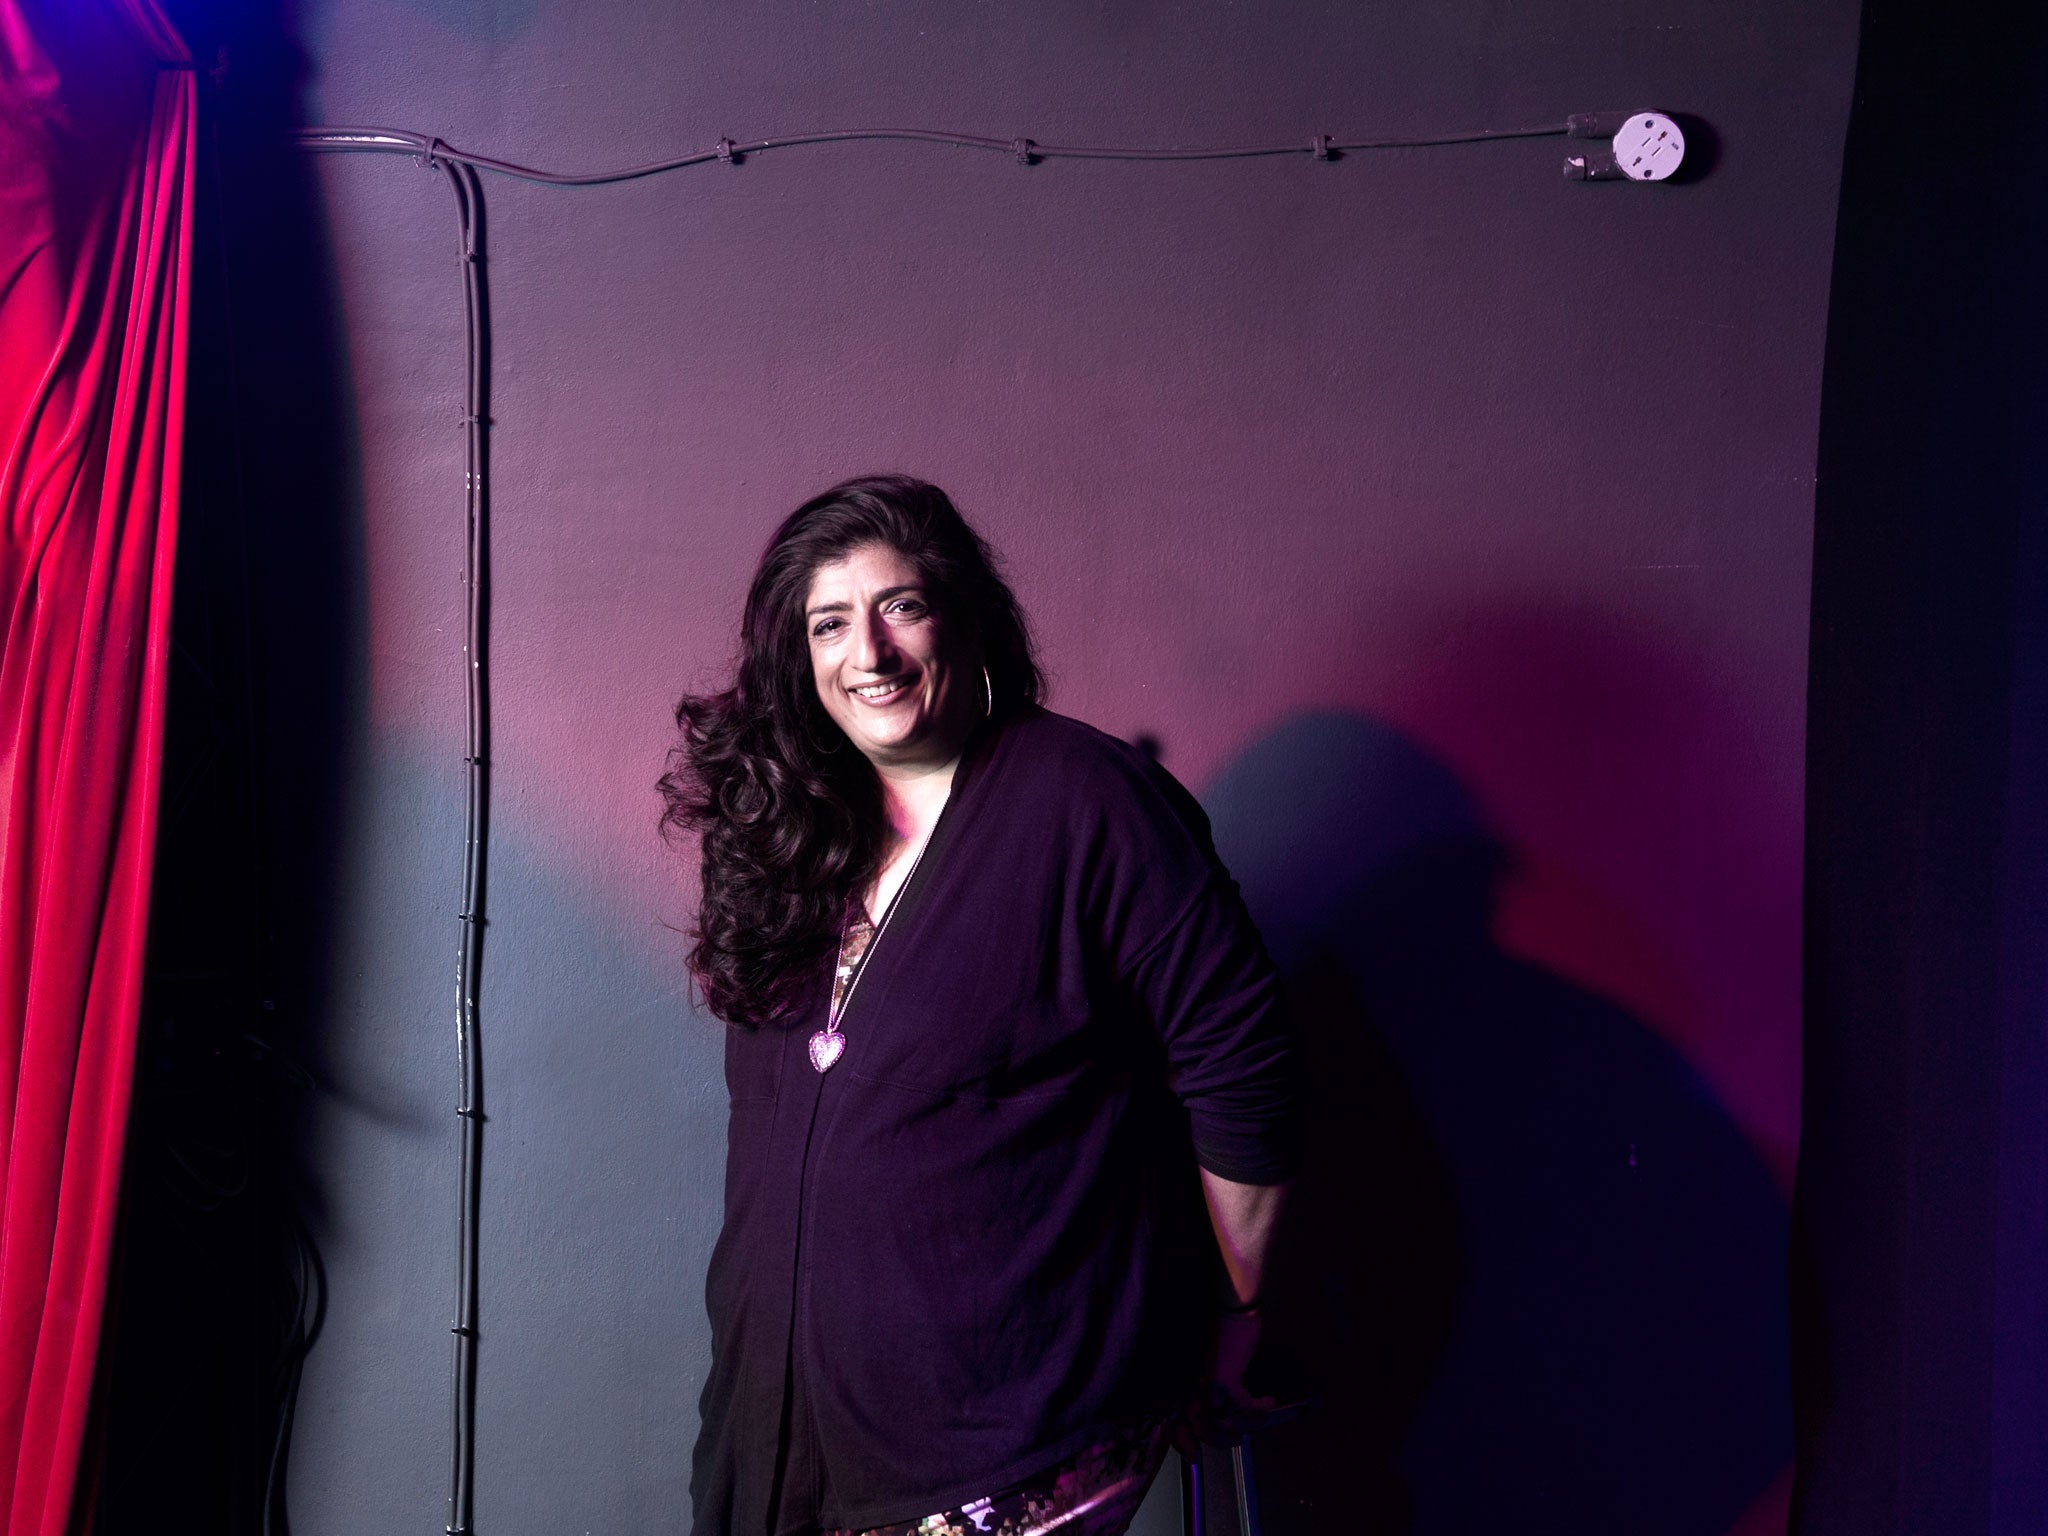 Comedian Sajeela Kershi tells her own stories about being a Muslim immigrant